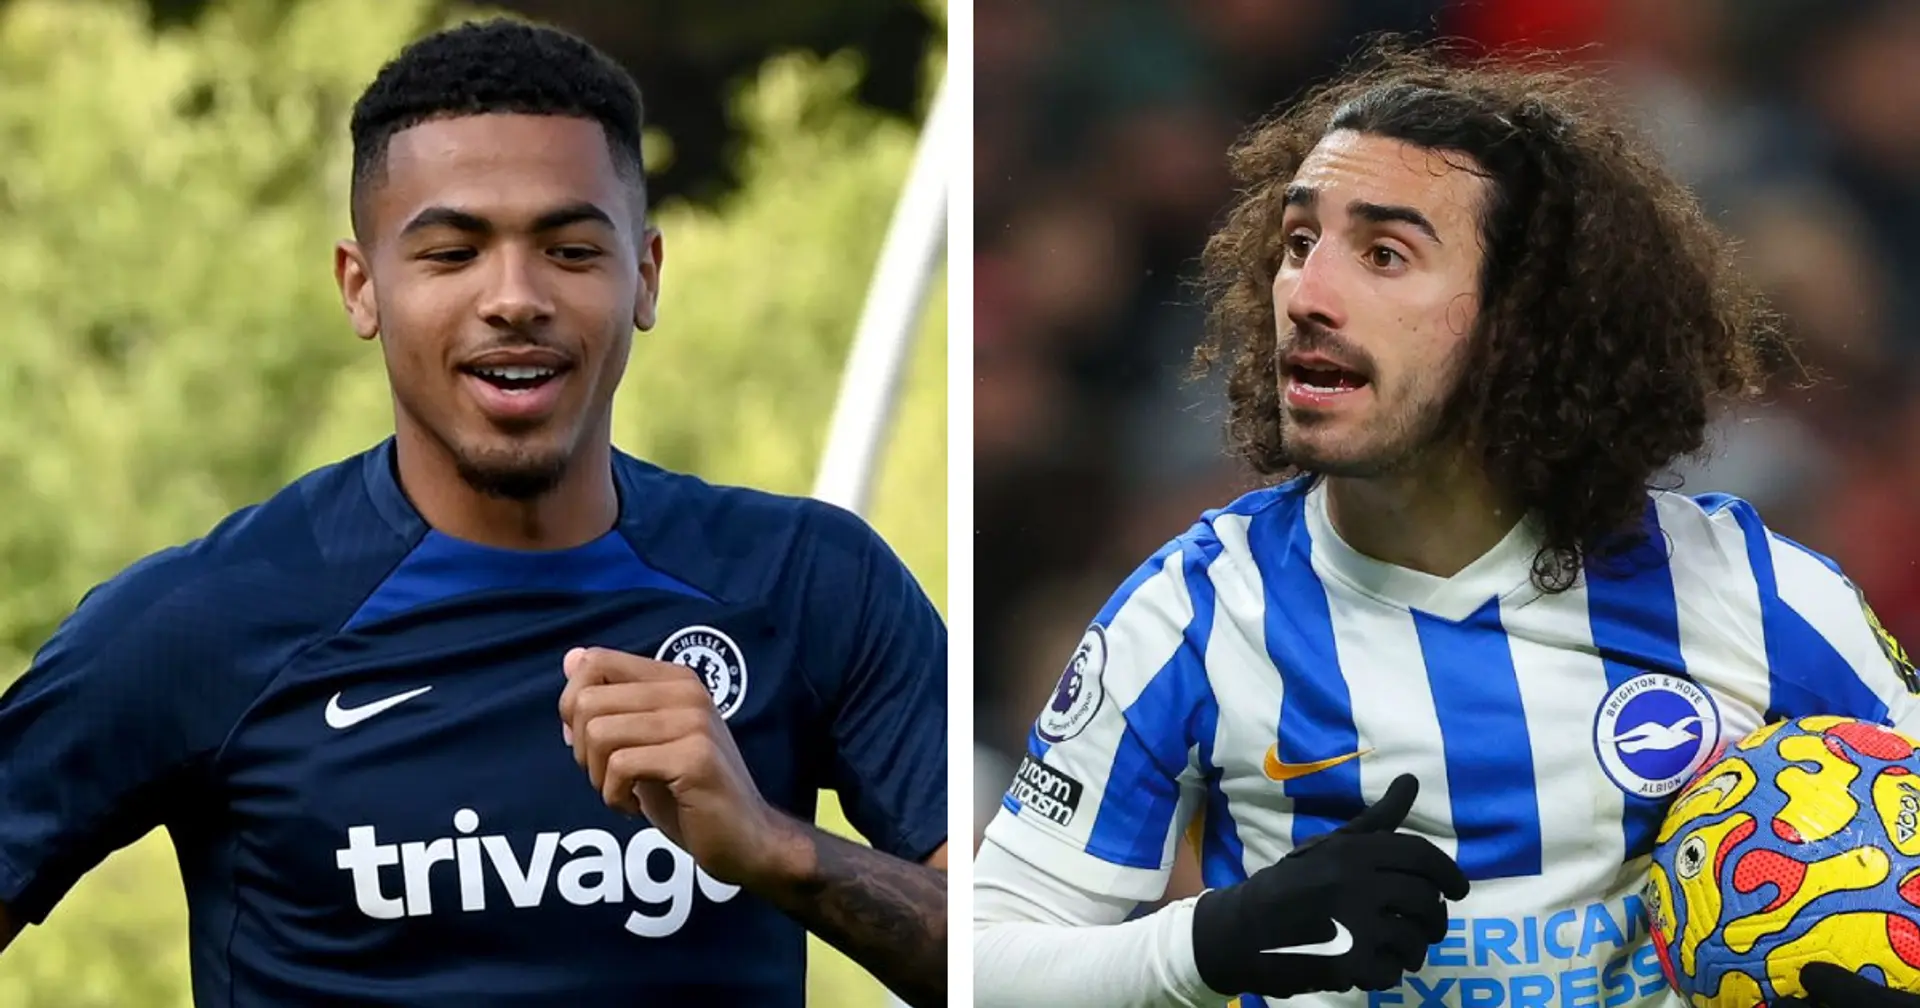 Colwill offered to Brighton as part of Cucurella deal (reliability: 5 stars)